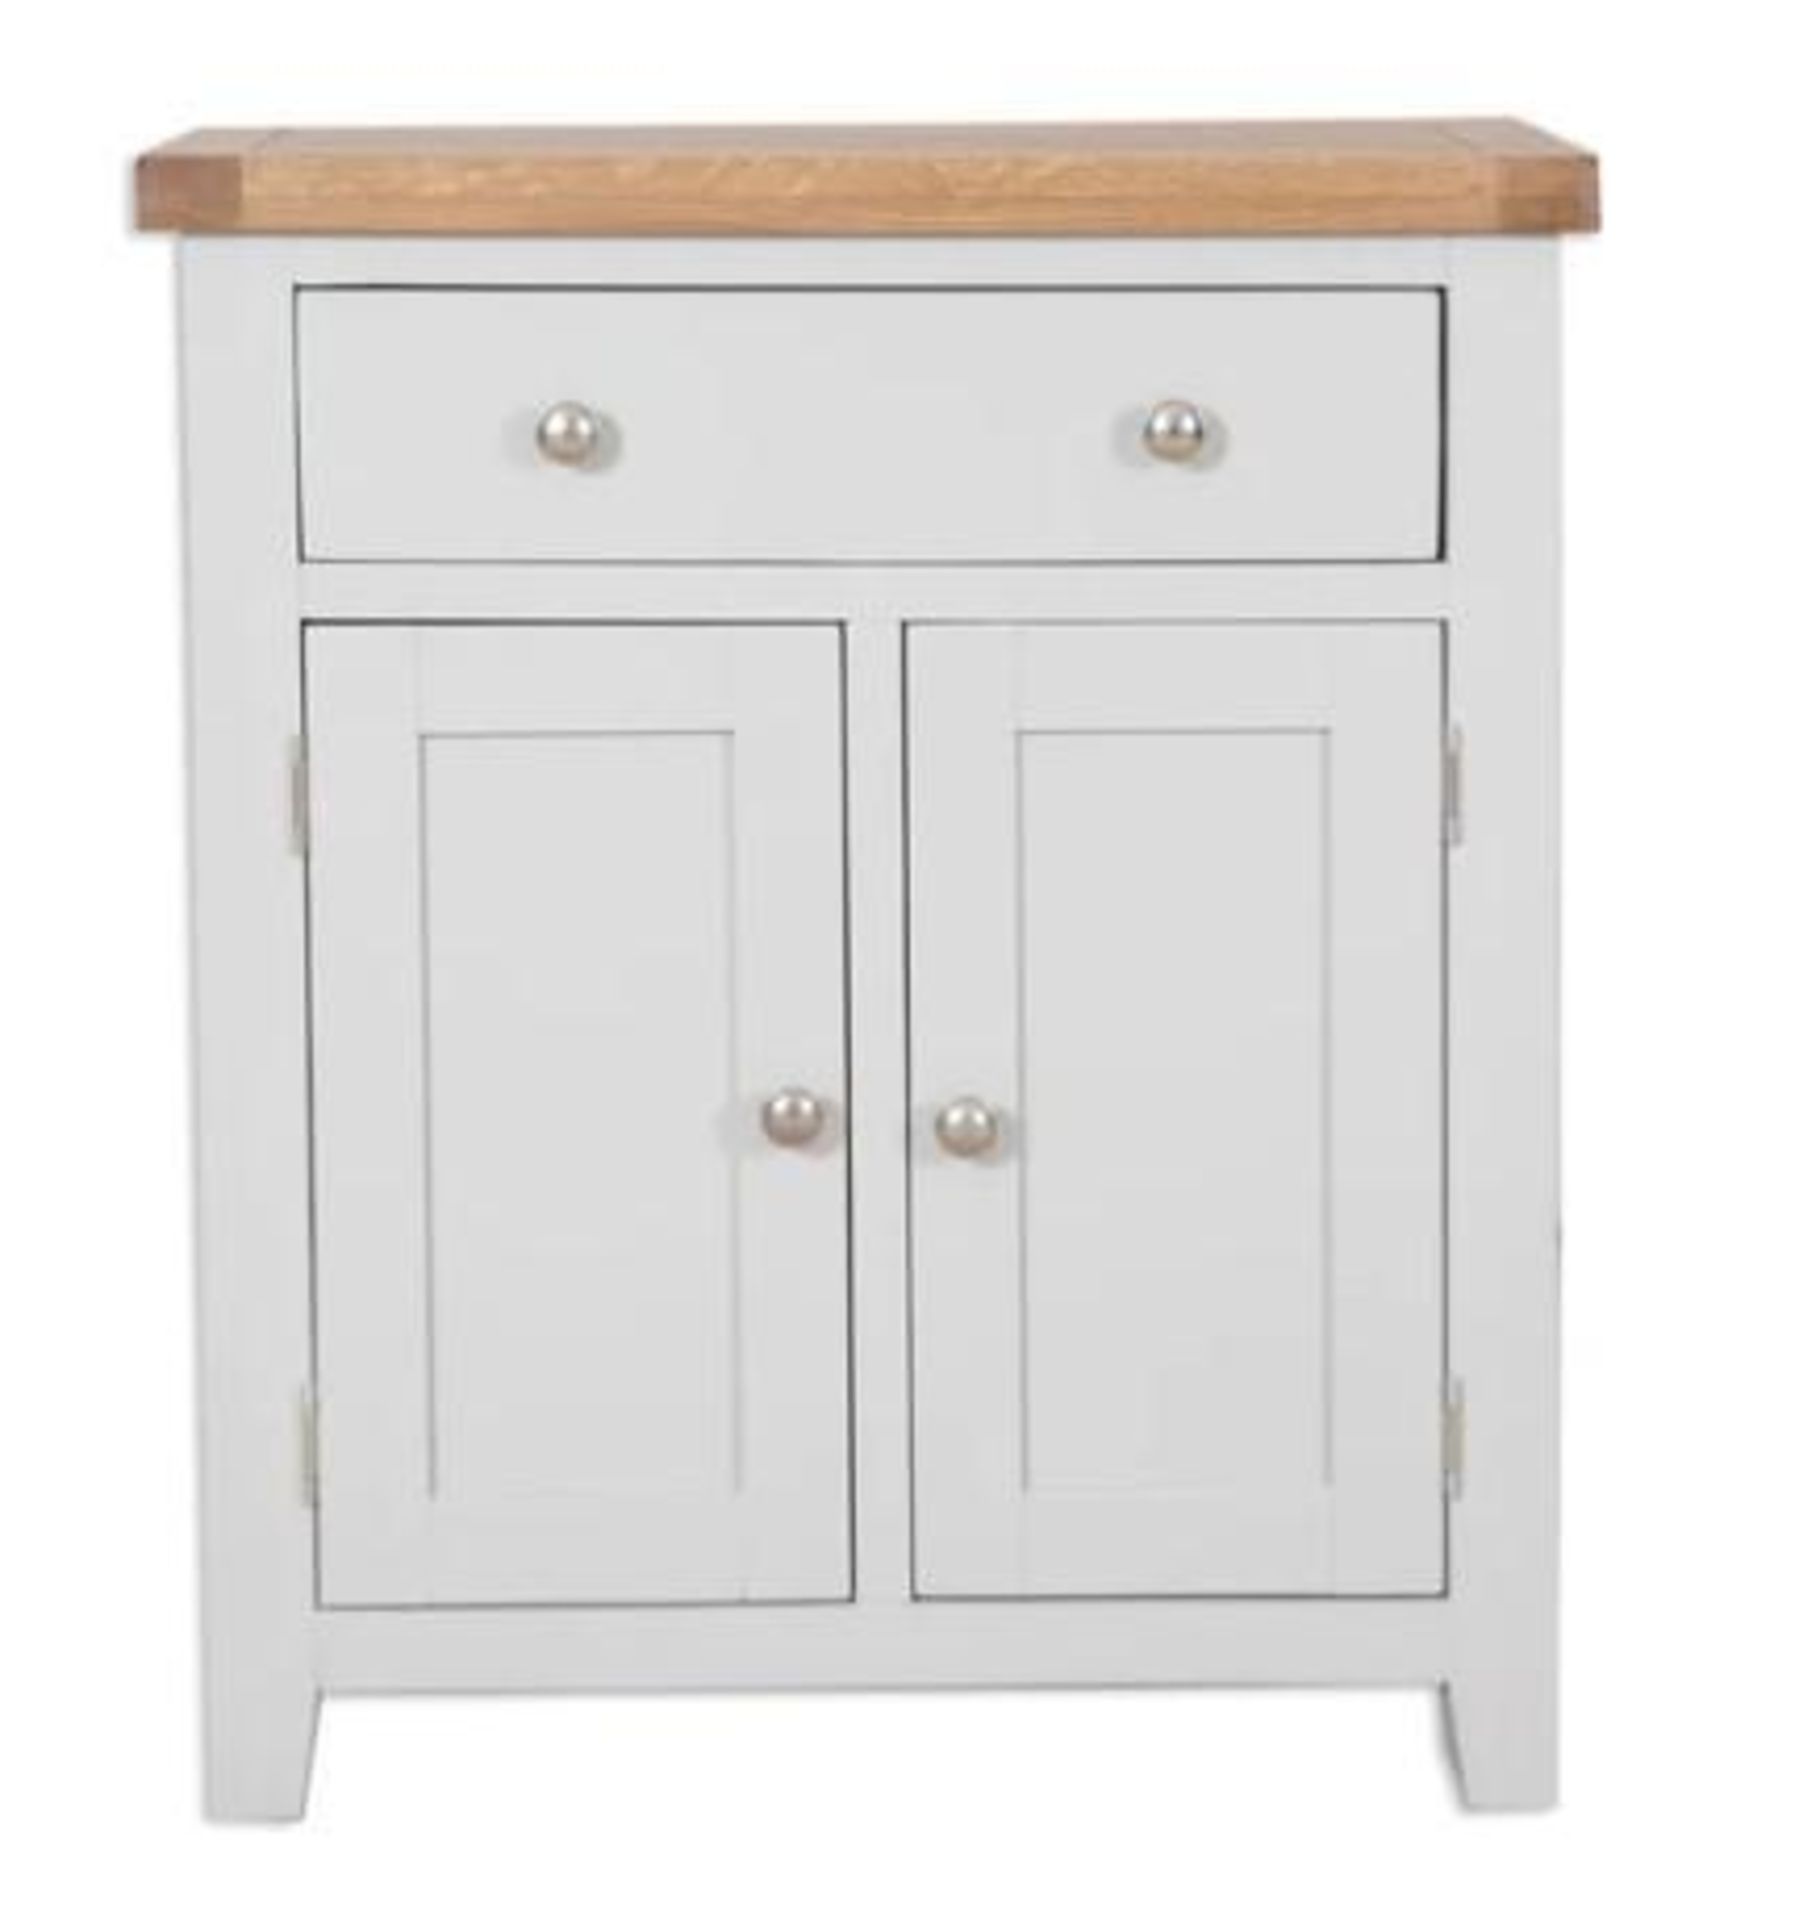 *EX DISPLAY* Melbourne ivory hall cabinet. RRP: £359.00